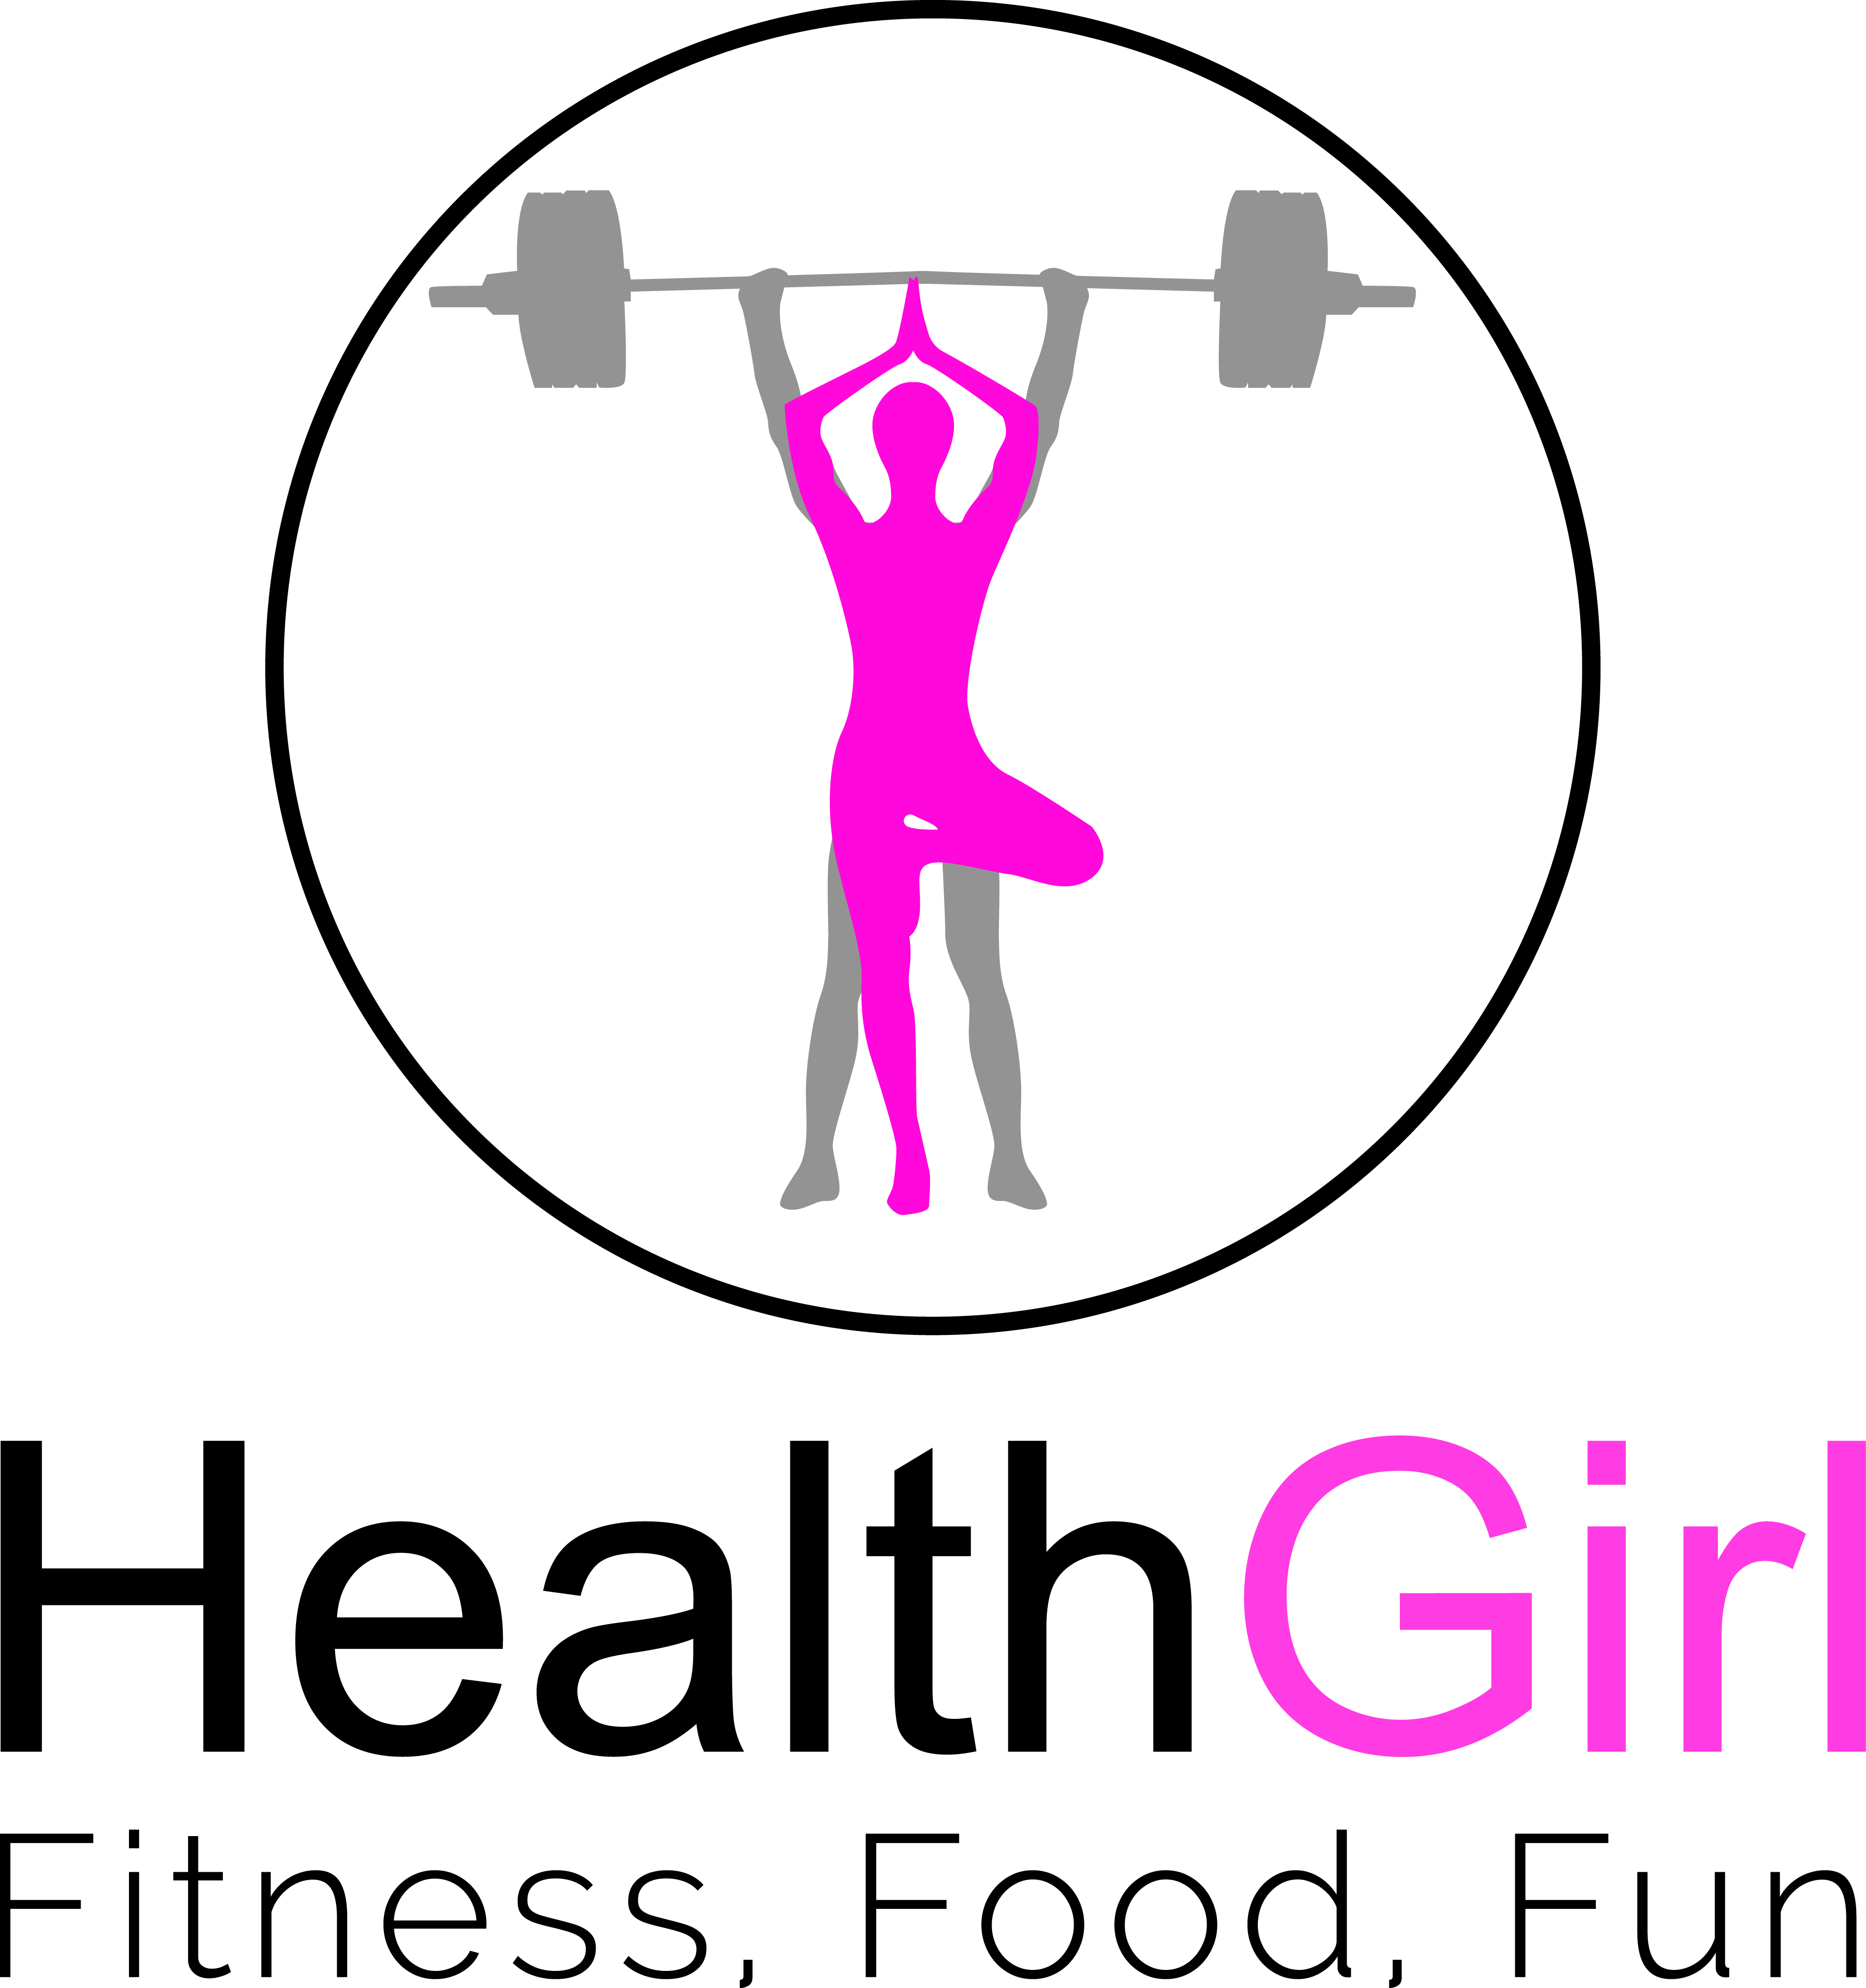 pink and black exercising image